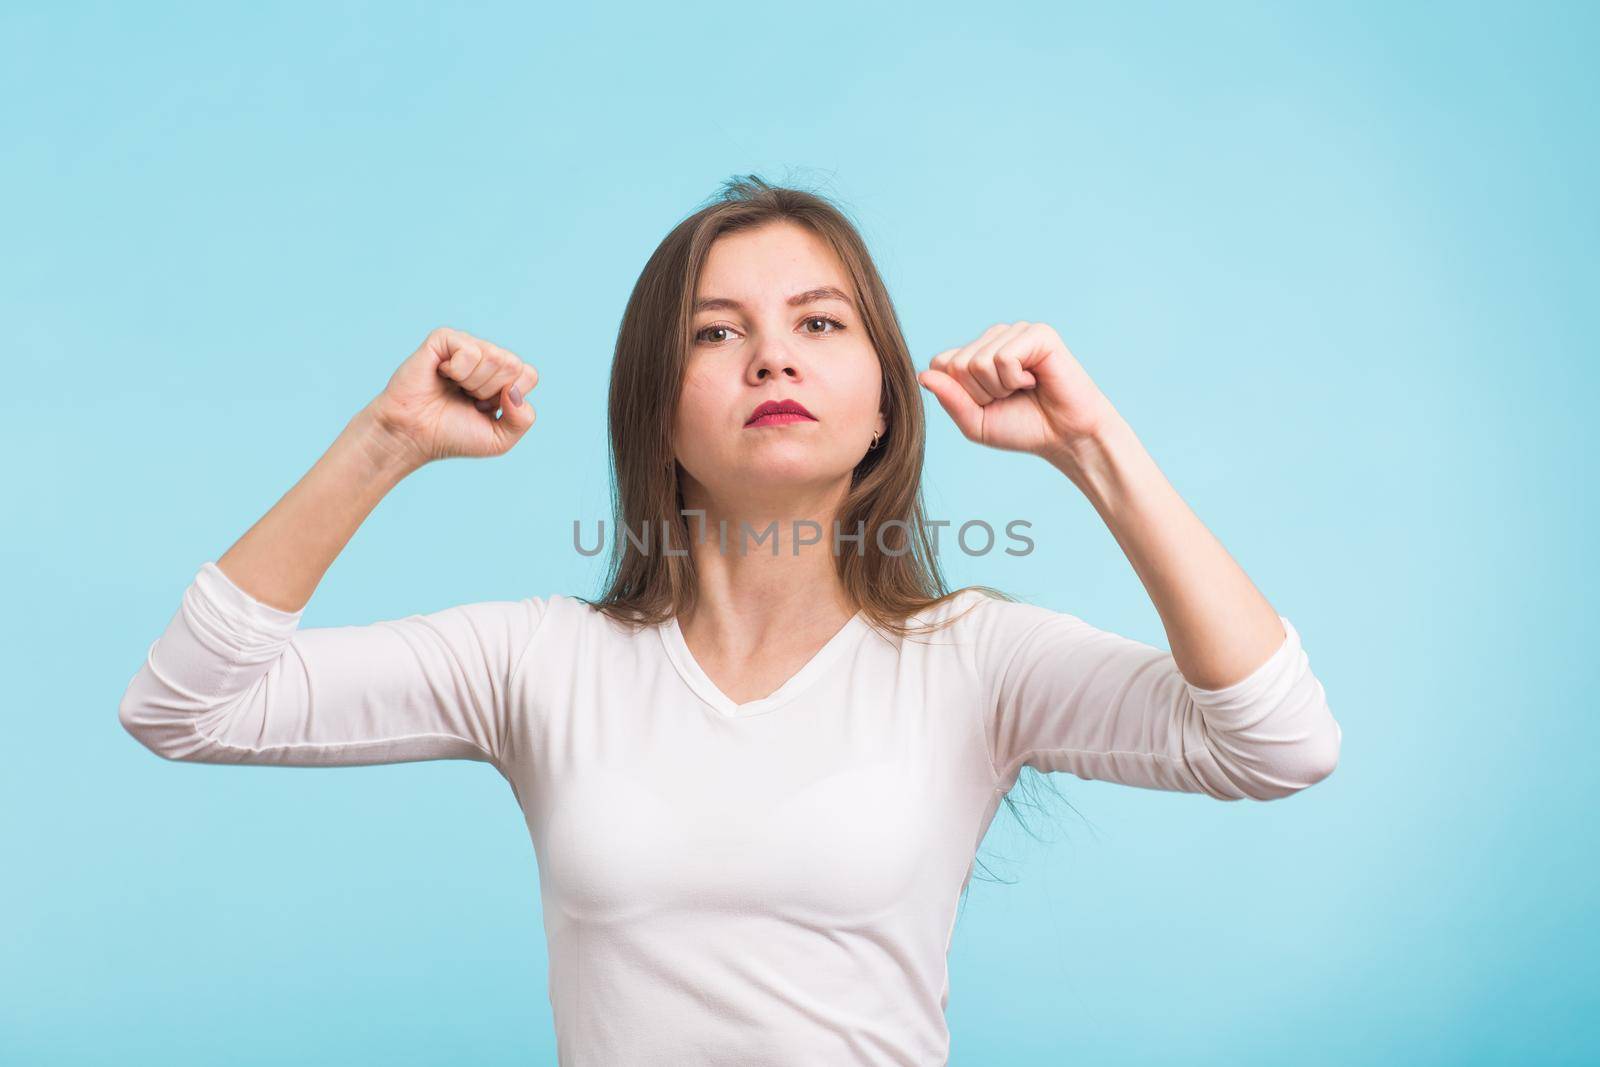 Superhero girl. Confident young woman isolated on blue background by Satura86